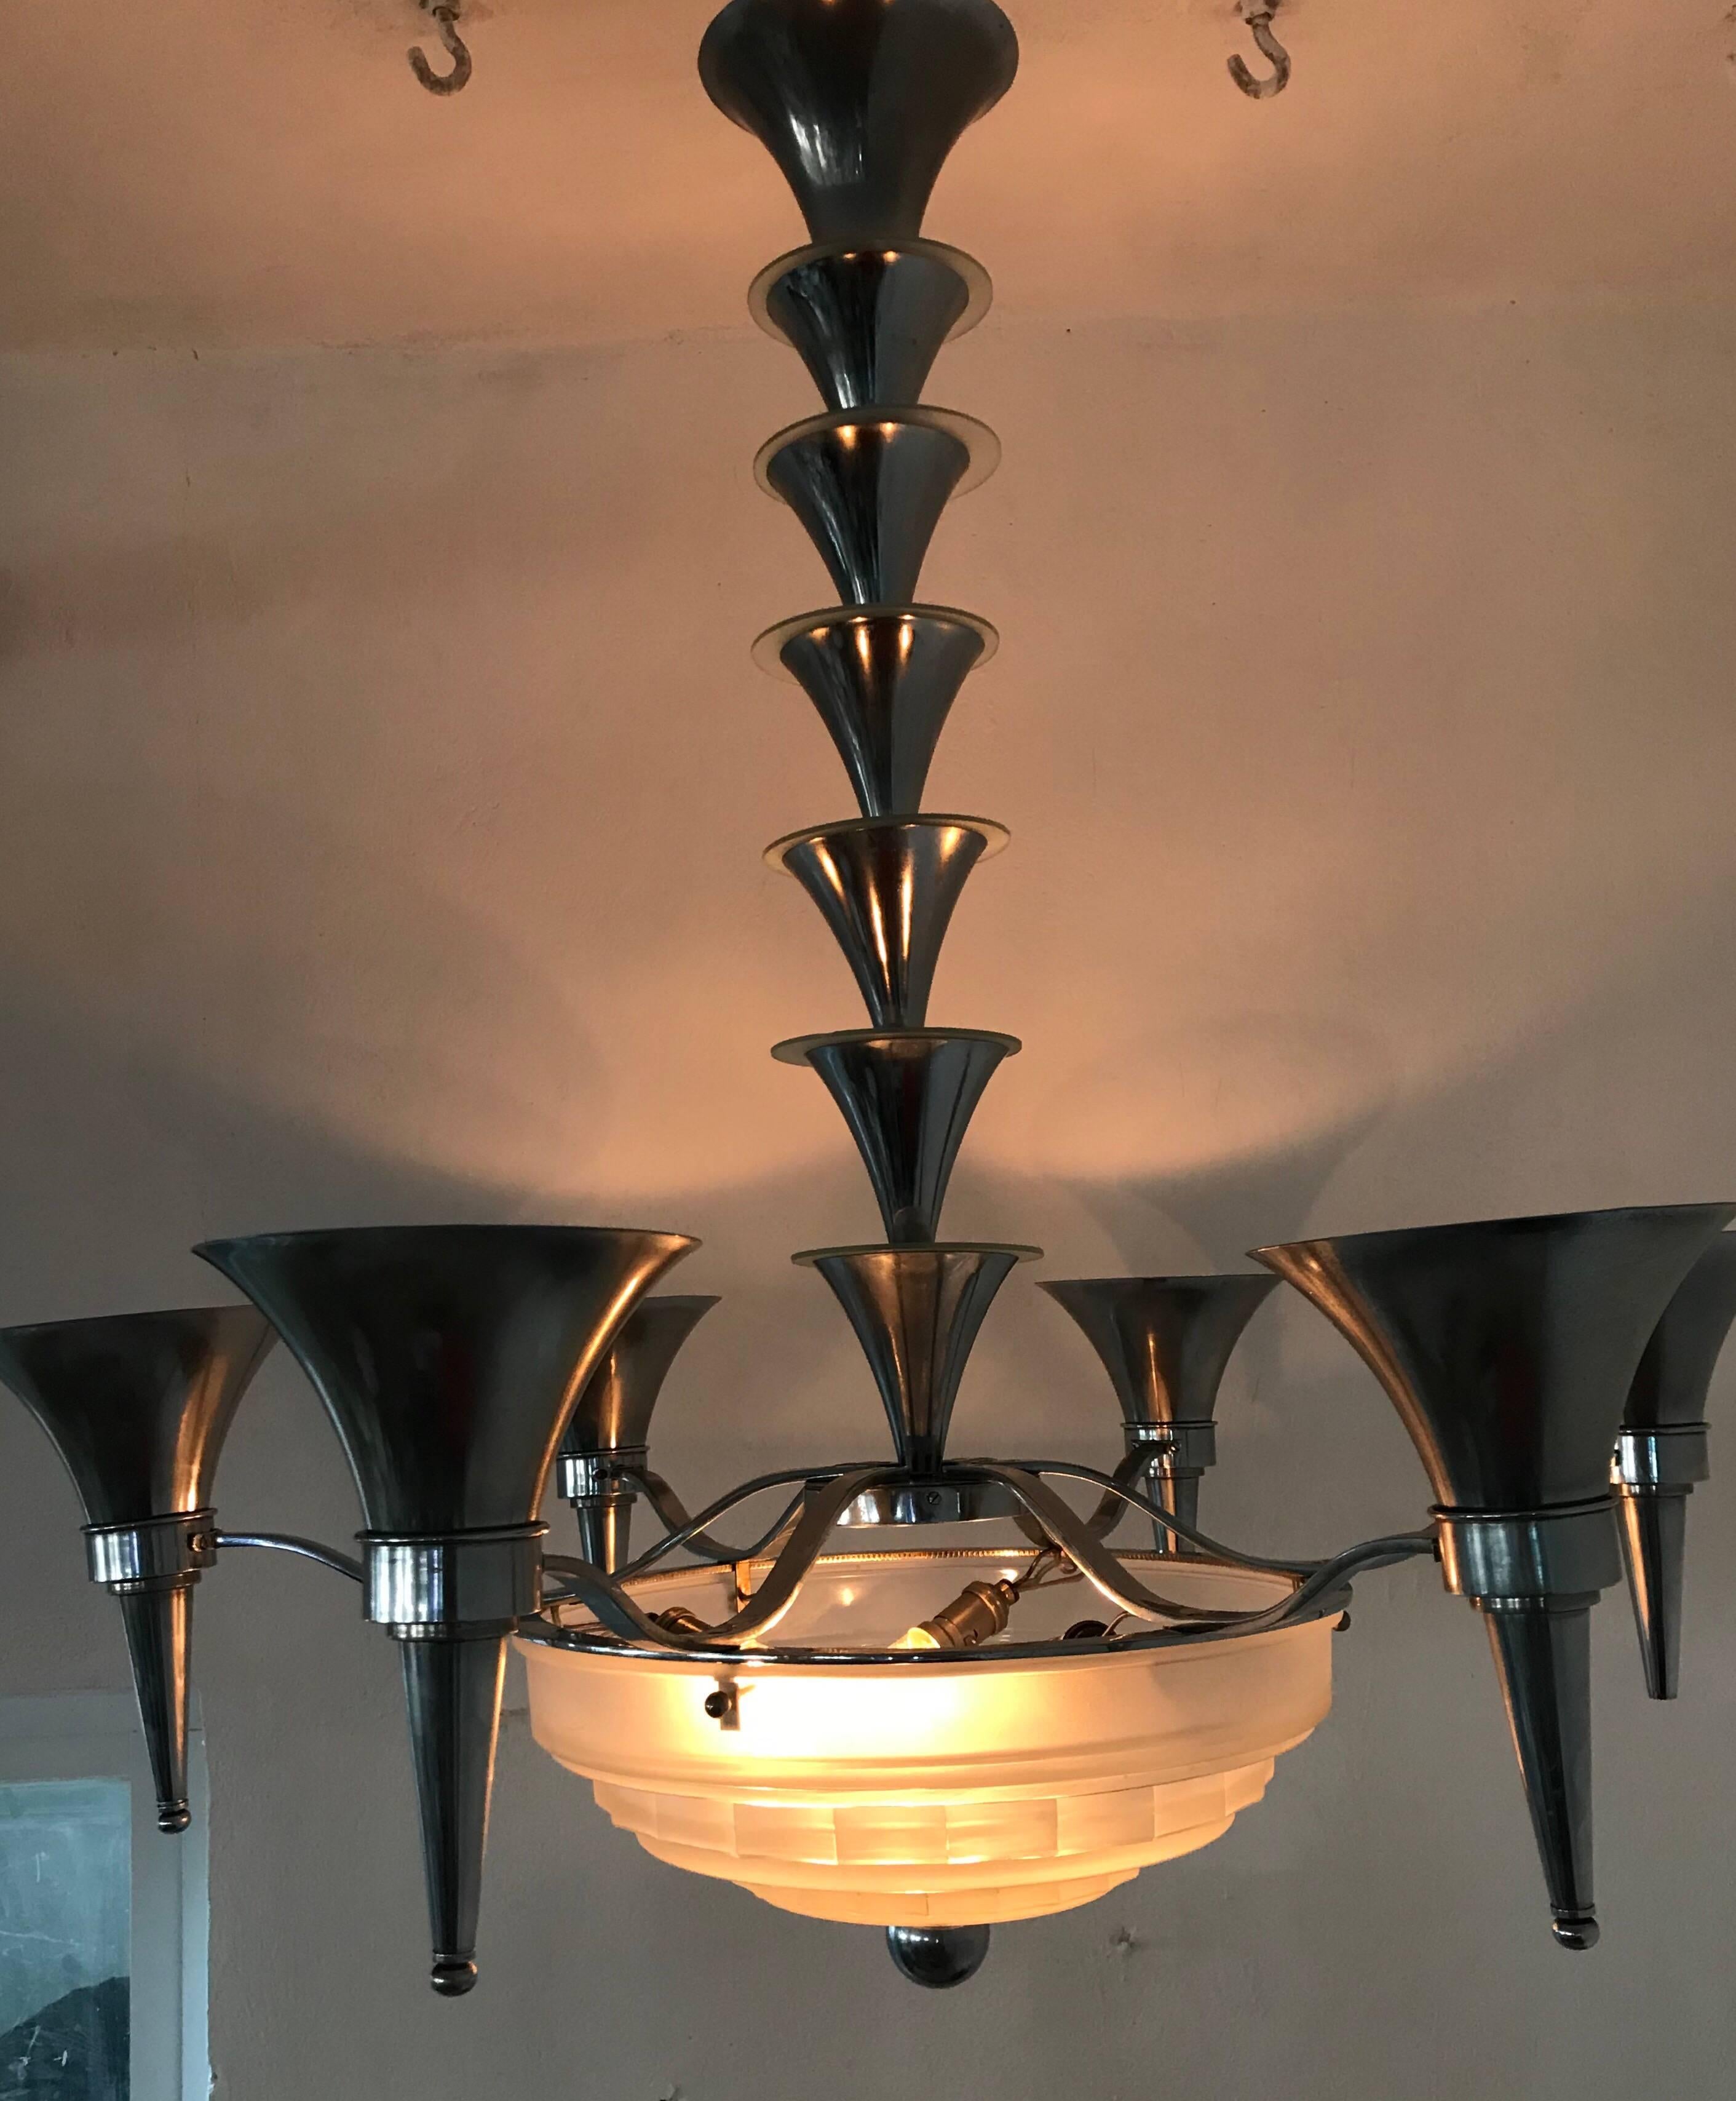 9 light French Art Deco Chandelier by Sabino in Chrome and pressed glass.
Signed on the Hardware and glass (which has one tiny chip on the rim, unnoticeable when assembled).

